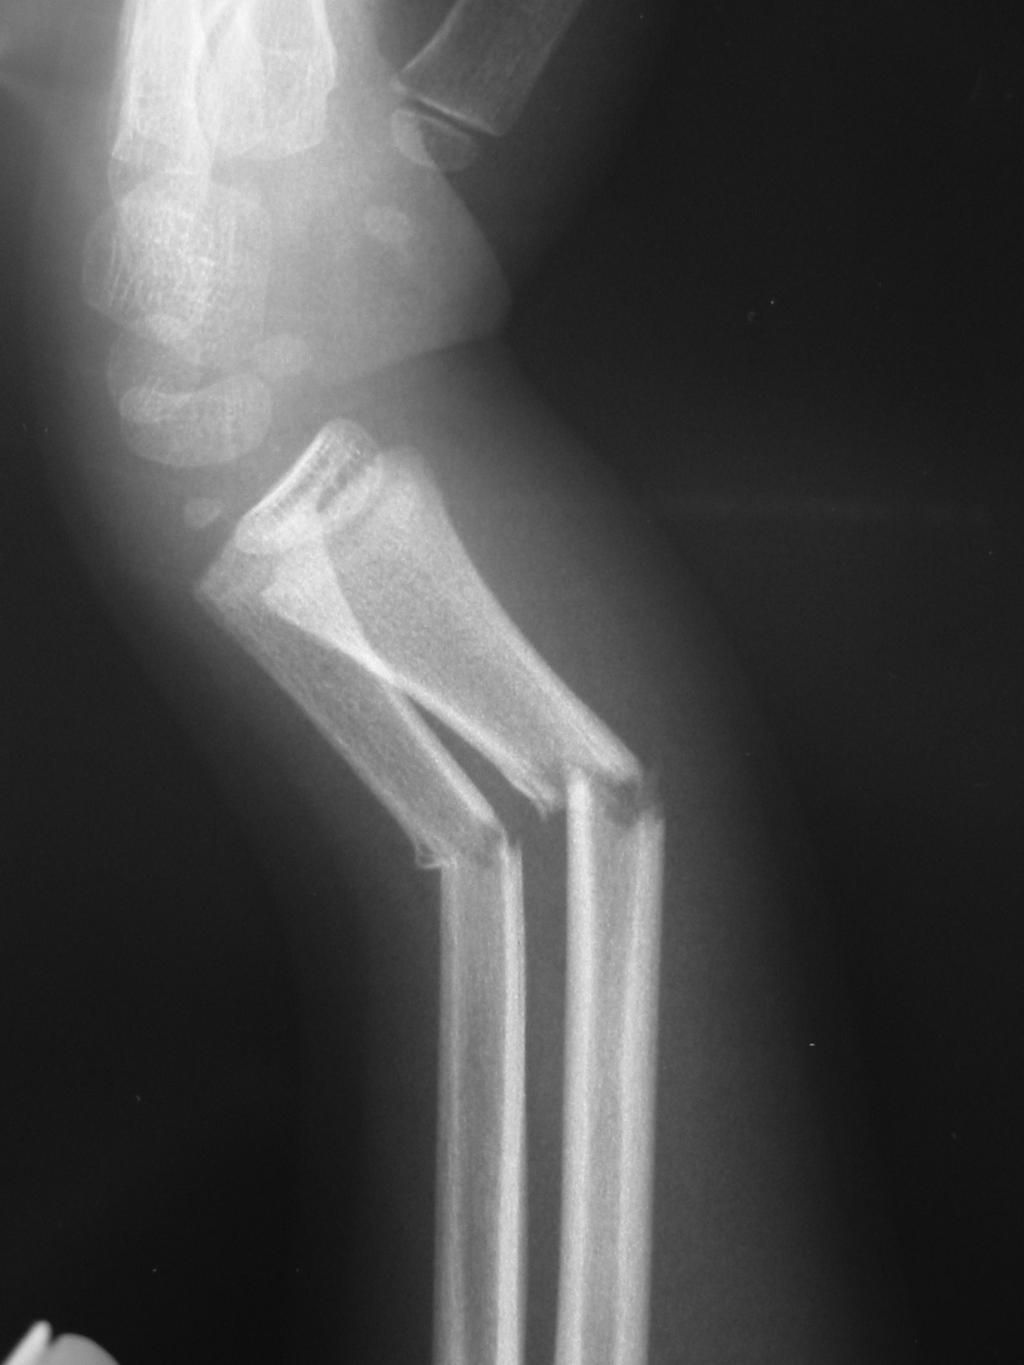 COMMON PAEDIATRIC ORTHOPAEDIC PROBLEMS AND FRACTURES 8.1 usually require accurate reduction and internal fixation to minimize the risk of growth arrest.